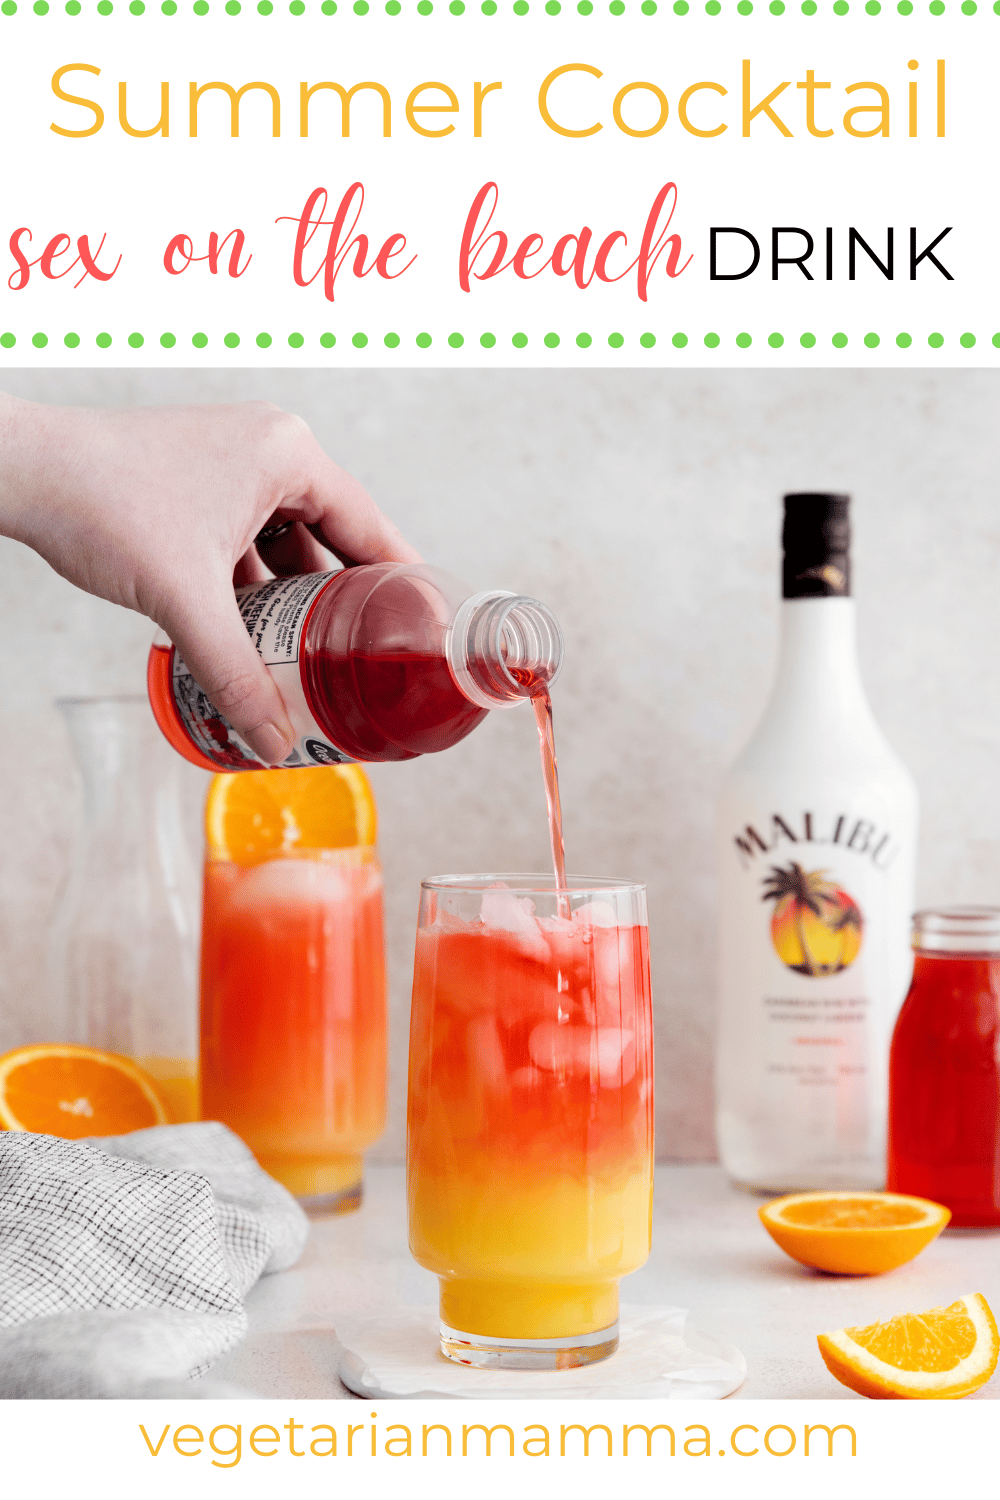 If you are looking for a super fruit, delicious gorgeous drink, you have got to try this Sex on the Beach Drink Recipe Malibu. This Sex on the Beach Drink Recipe Malibu is fun and fruity with a subtle coconut flavor and a bit of tartness from the cranberry juice.